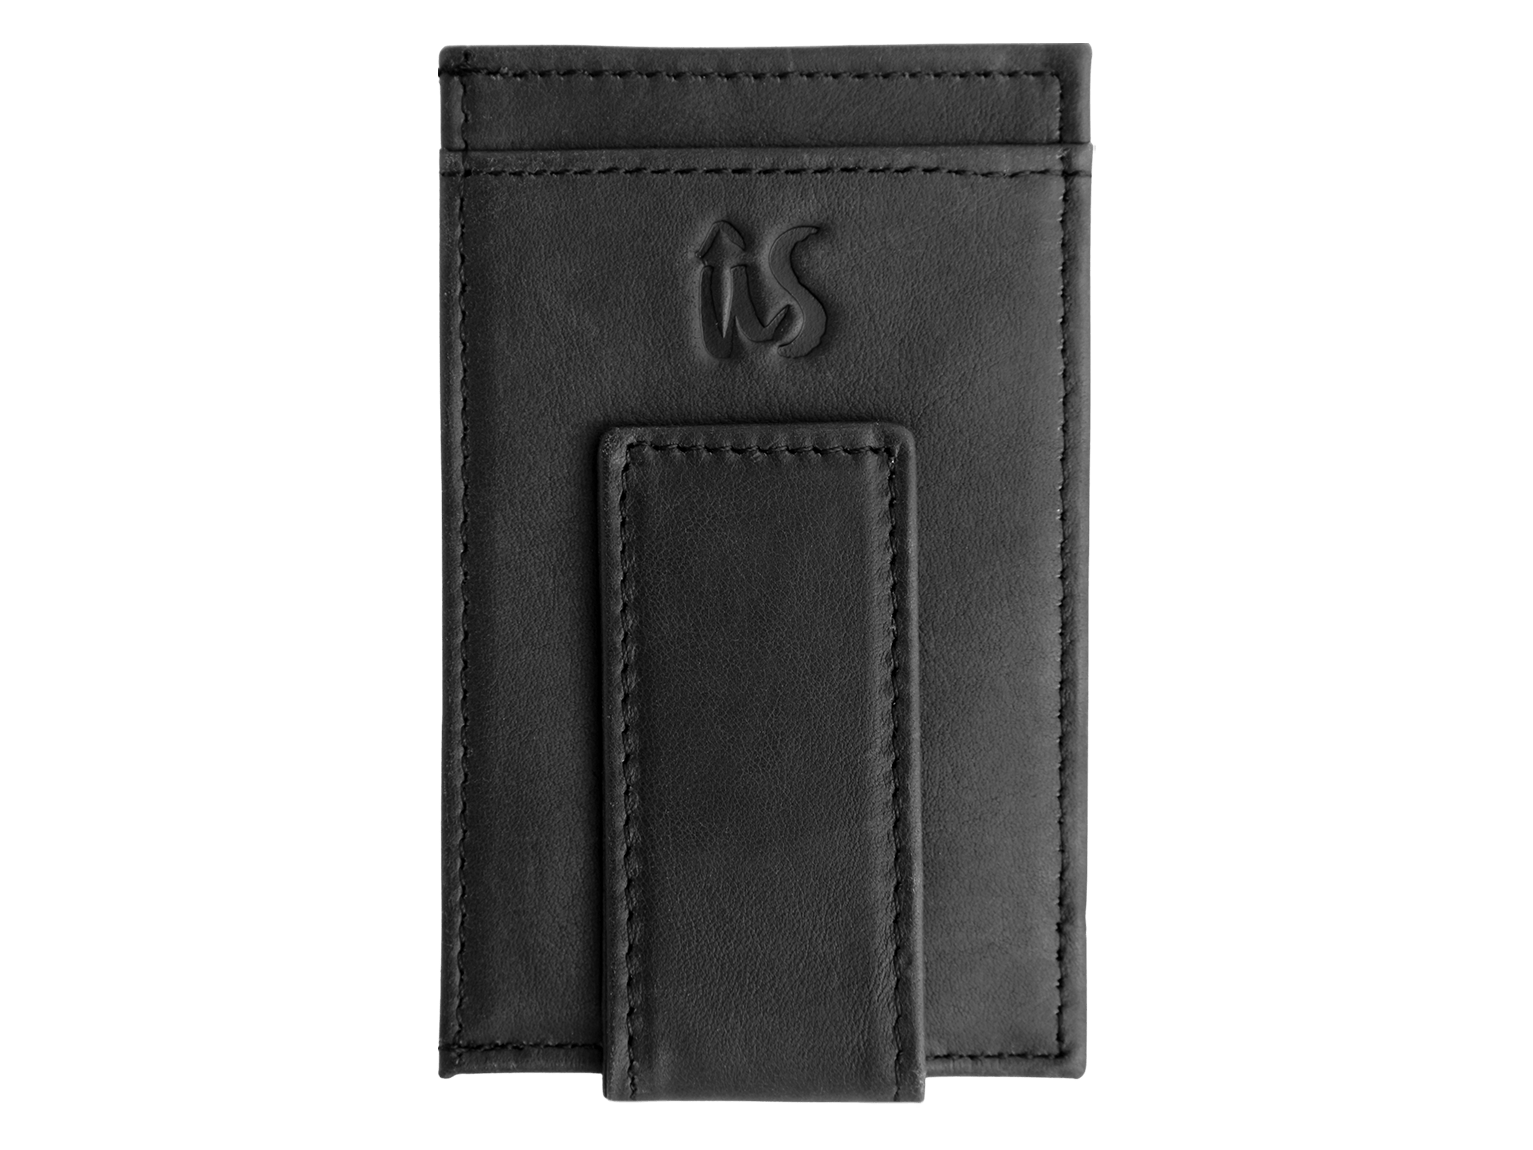 The Brando Money Clip  Genuine Leather Wallet by Ûs the Movement